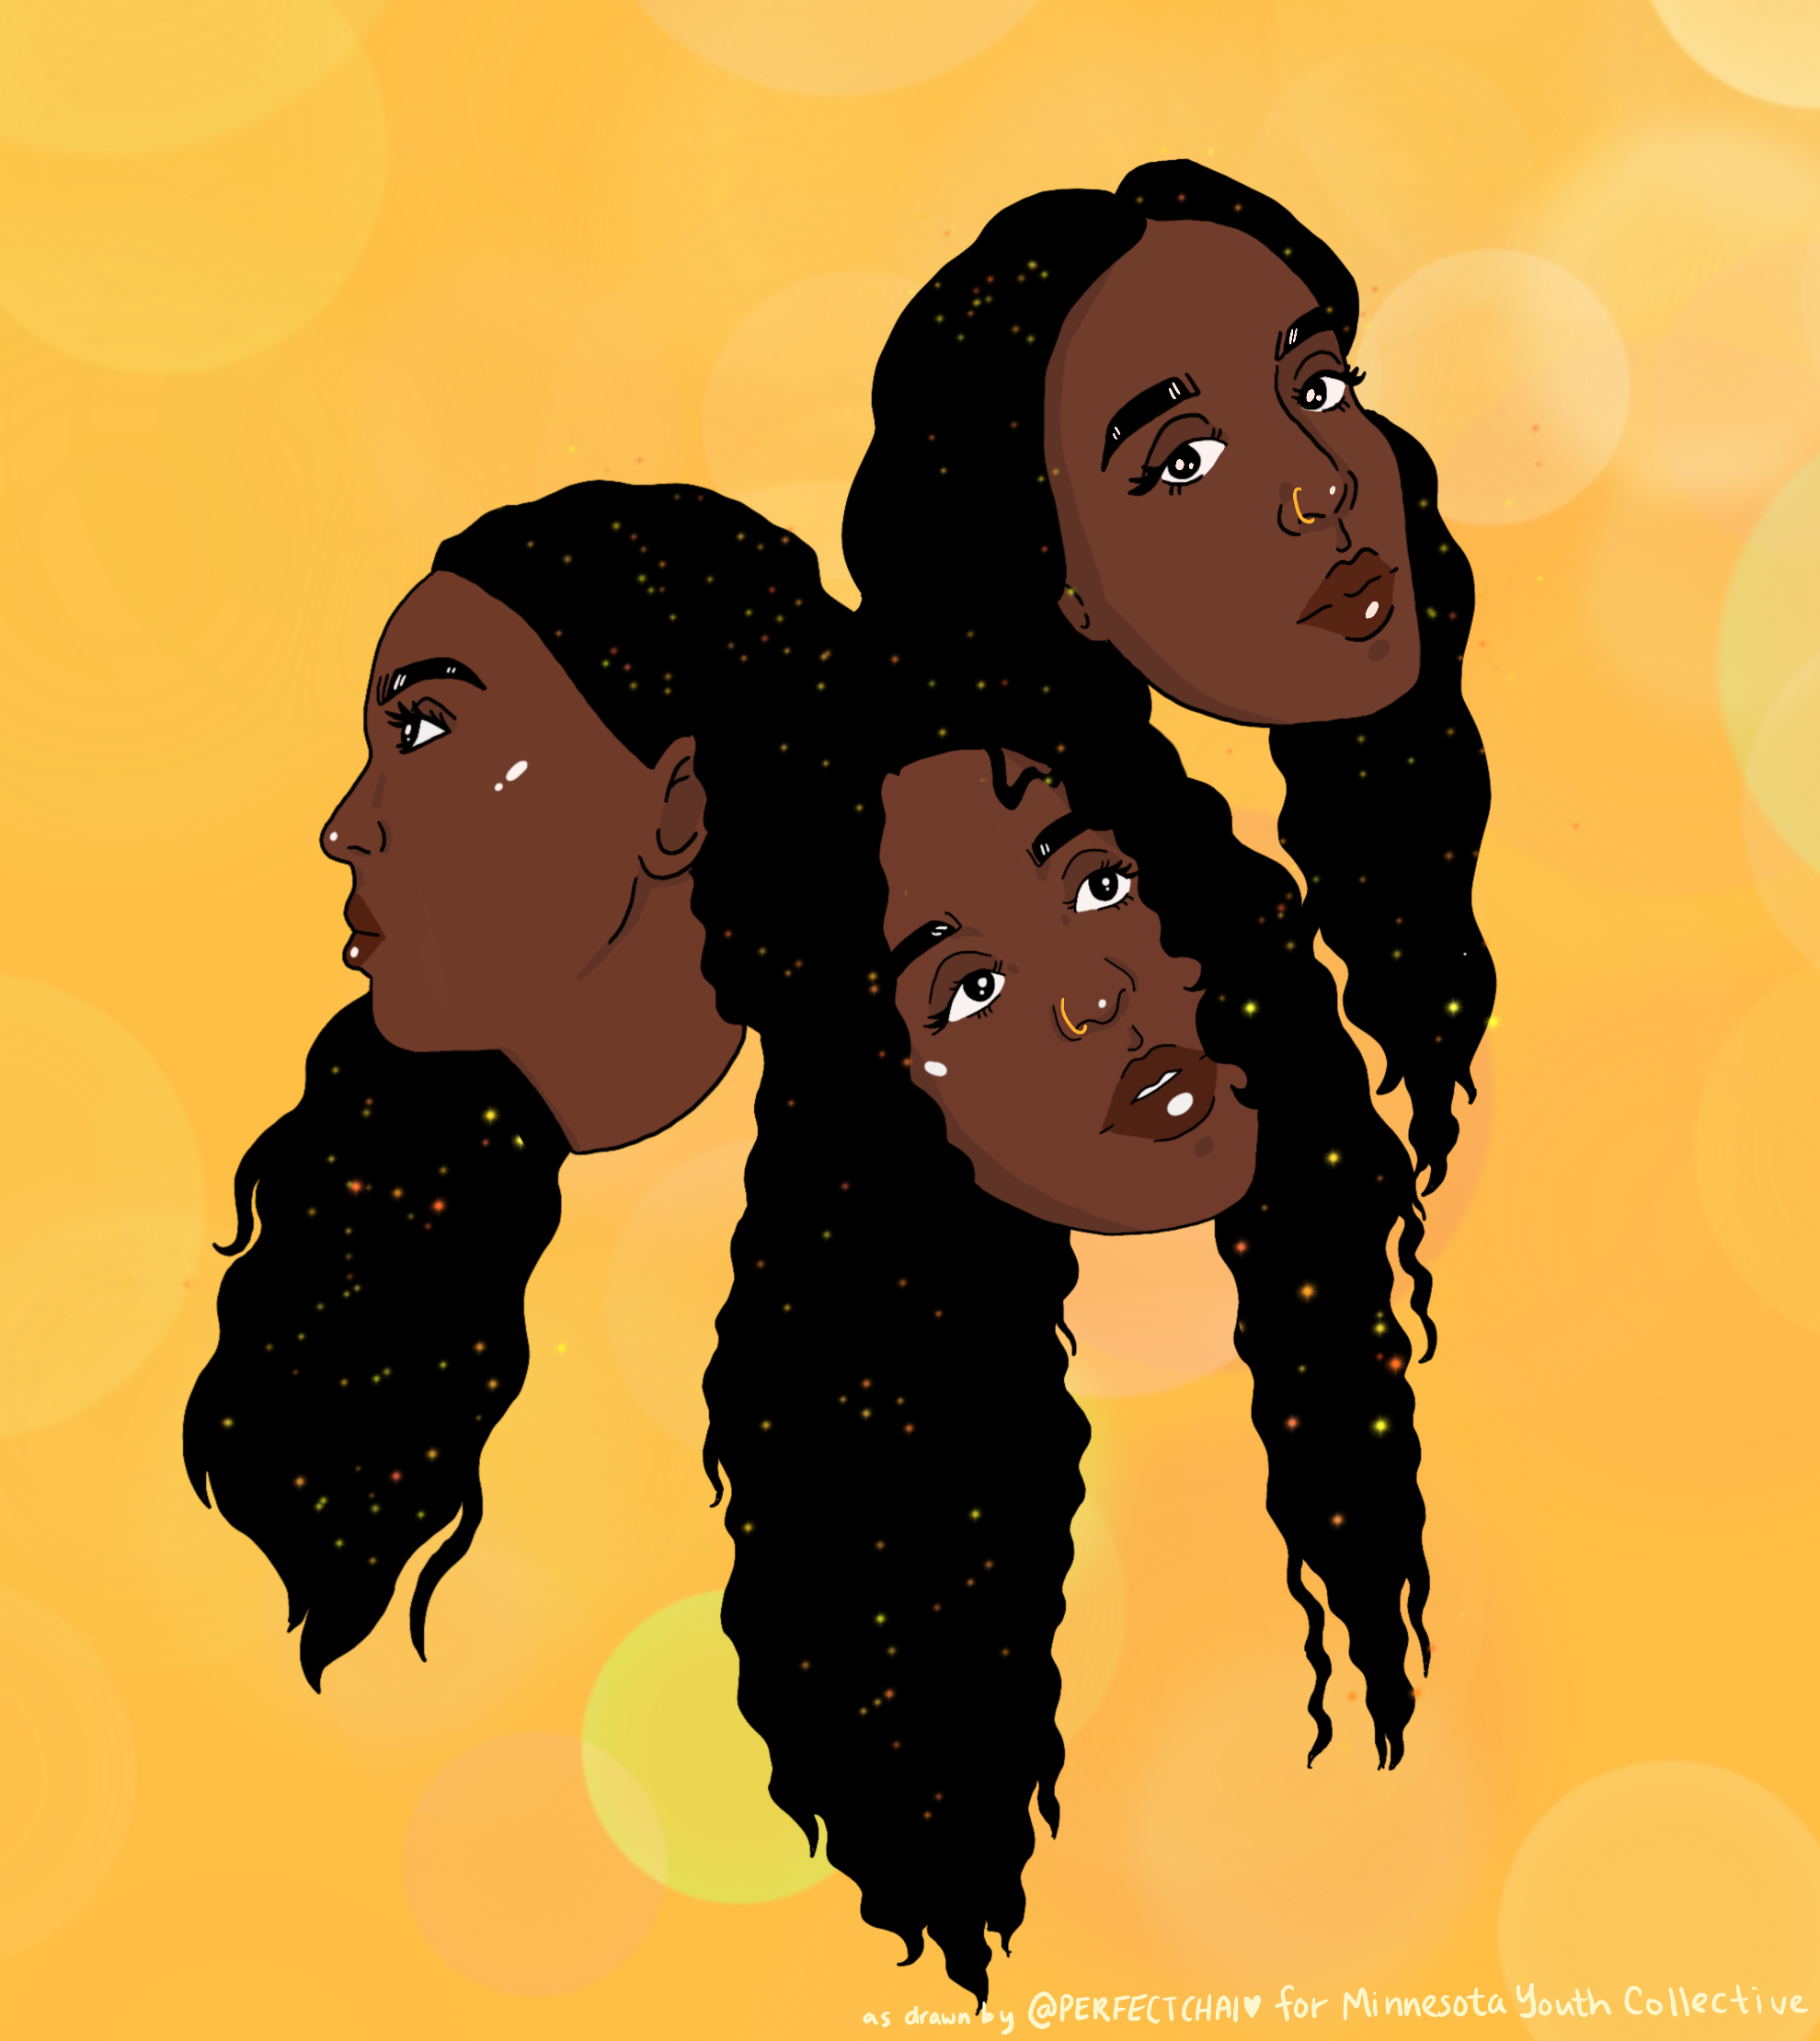 An Illustration of 3 women surrounded by bubble on a yellow background